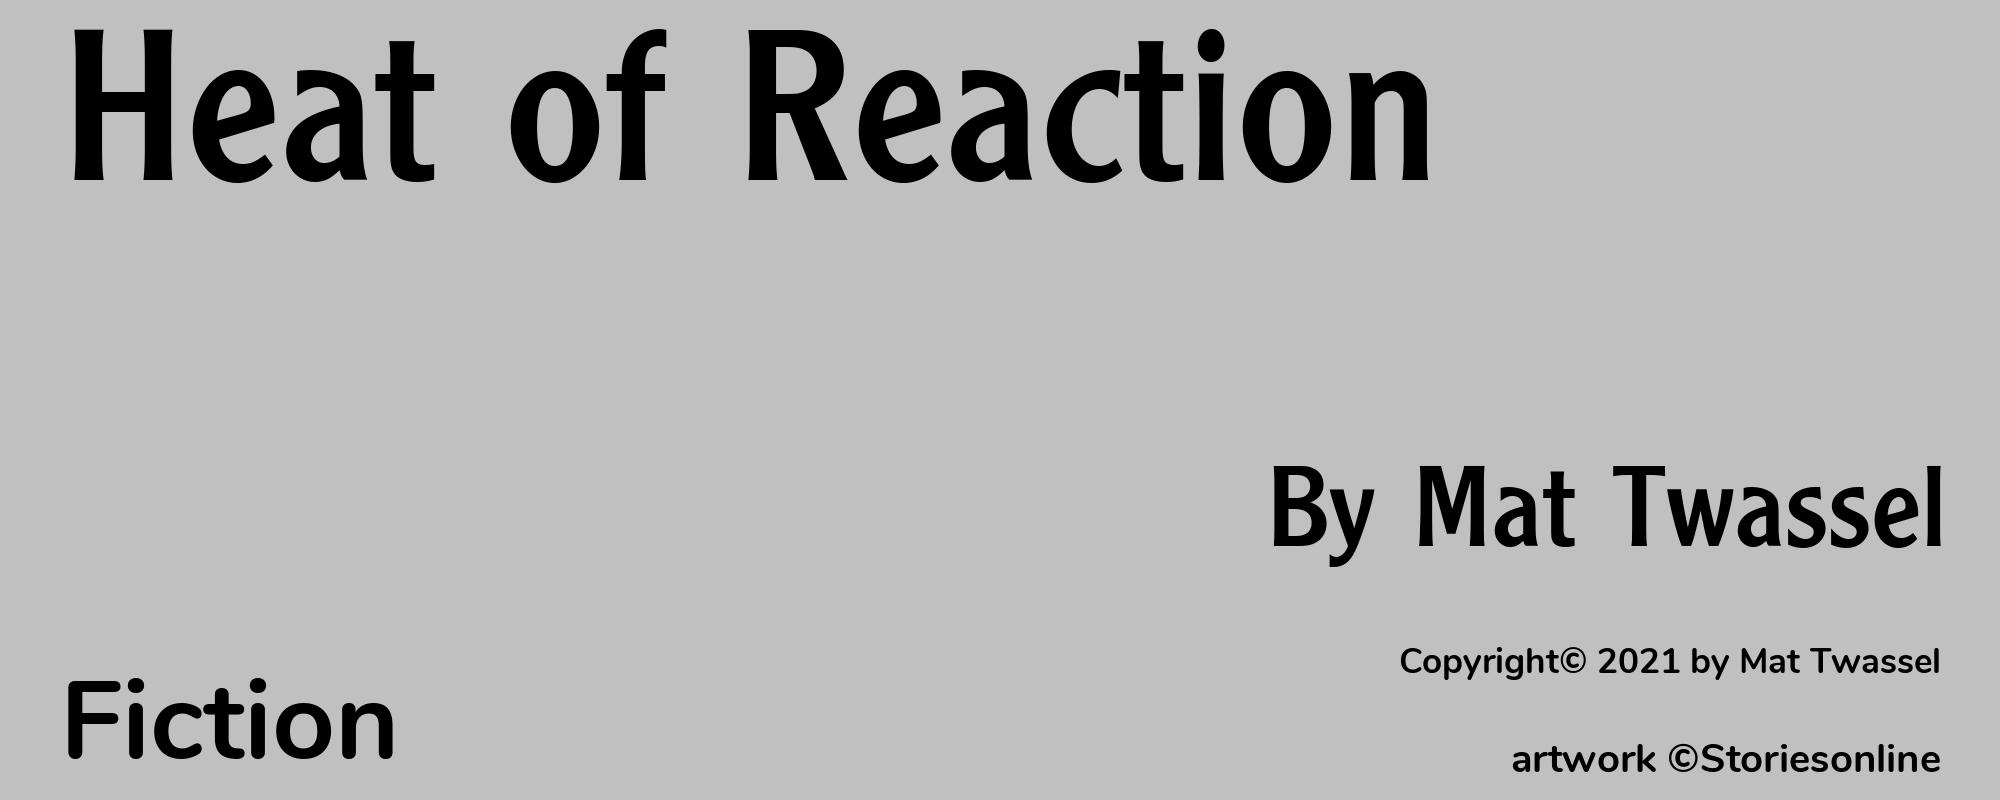 Heat of Reaction - Cover